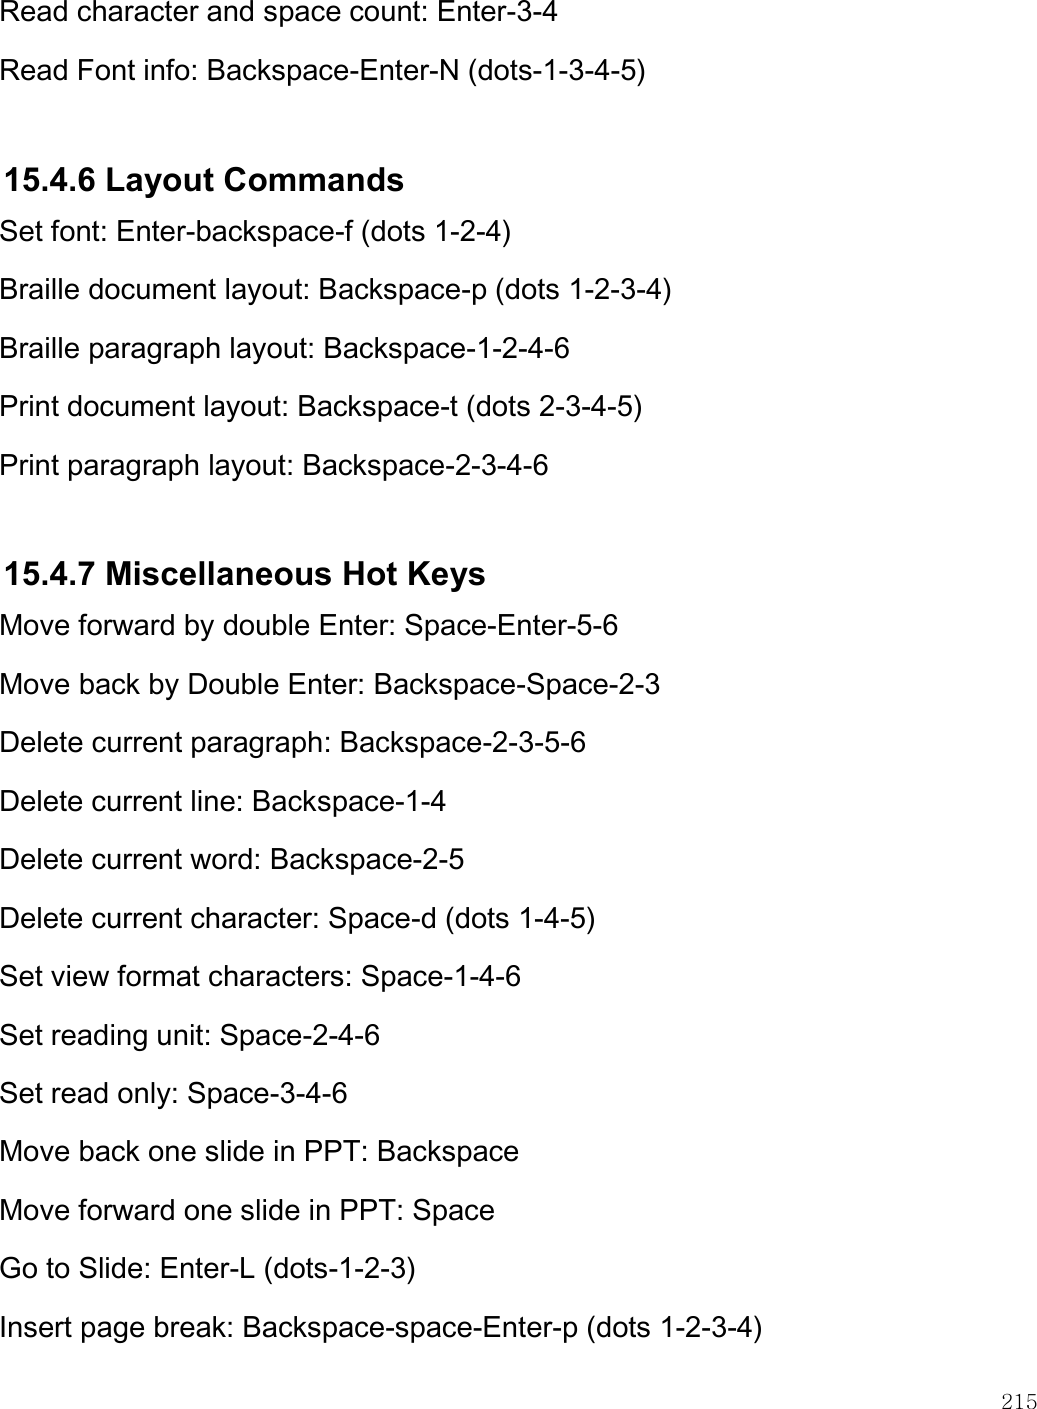    215  Read character and space count: Enter-3-4 Read Font info: Backspace-Enter-N (dots-1-3-4-5)  15.4.6 Layout Commands Set font: Enter-backspace-f (dots 1-2-4) Braille document layout: Backspace-p (dots 1-2-3-4) Braille paragraph layout: Backspace-1-2-4-6 Print document layout: Backspace-t (dots 2-3-4-5) Print paragraph layout: Backspace-2-3-4-6  15.4.7 Miscellaneous Hot Keys Move forward by double Enter: Space-Enter-5-6 Move back by Double Enter: Backspace-Space-2-3 Delete current paragraph: Backspace-2-3-5-6 Delete current line: Backspace-1-4 Delete current word: Backspace-2-5 Delete current character: Space-d (dots 1-4-5) Set view format characters: Space-1-4-6 Set reading unit: Space-2-4-6 Set read only: Space-3-4-6 Move back one slide in PPT: Backspace Move forward one slide in PPT: Space Go to Slide: Enter-L (dots-1-2-3) Insert page break: Backspace-space-Enter-p (dots 1-2-3-4) 